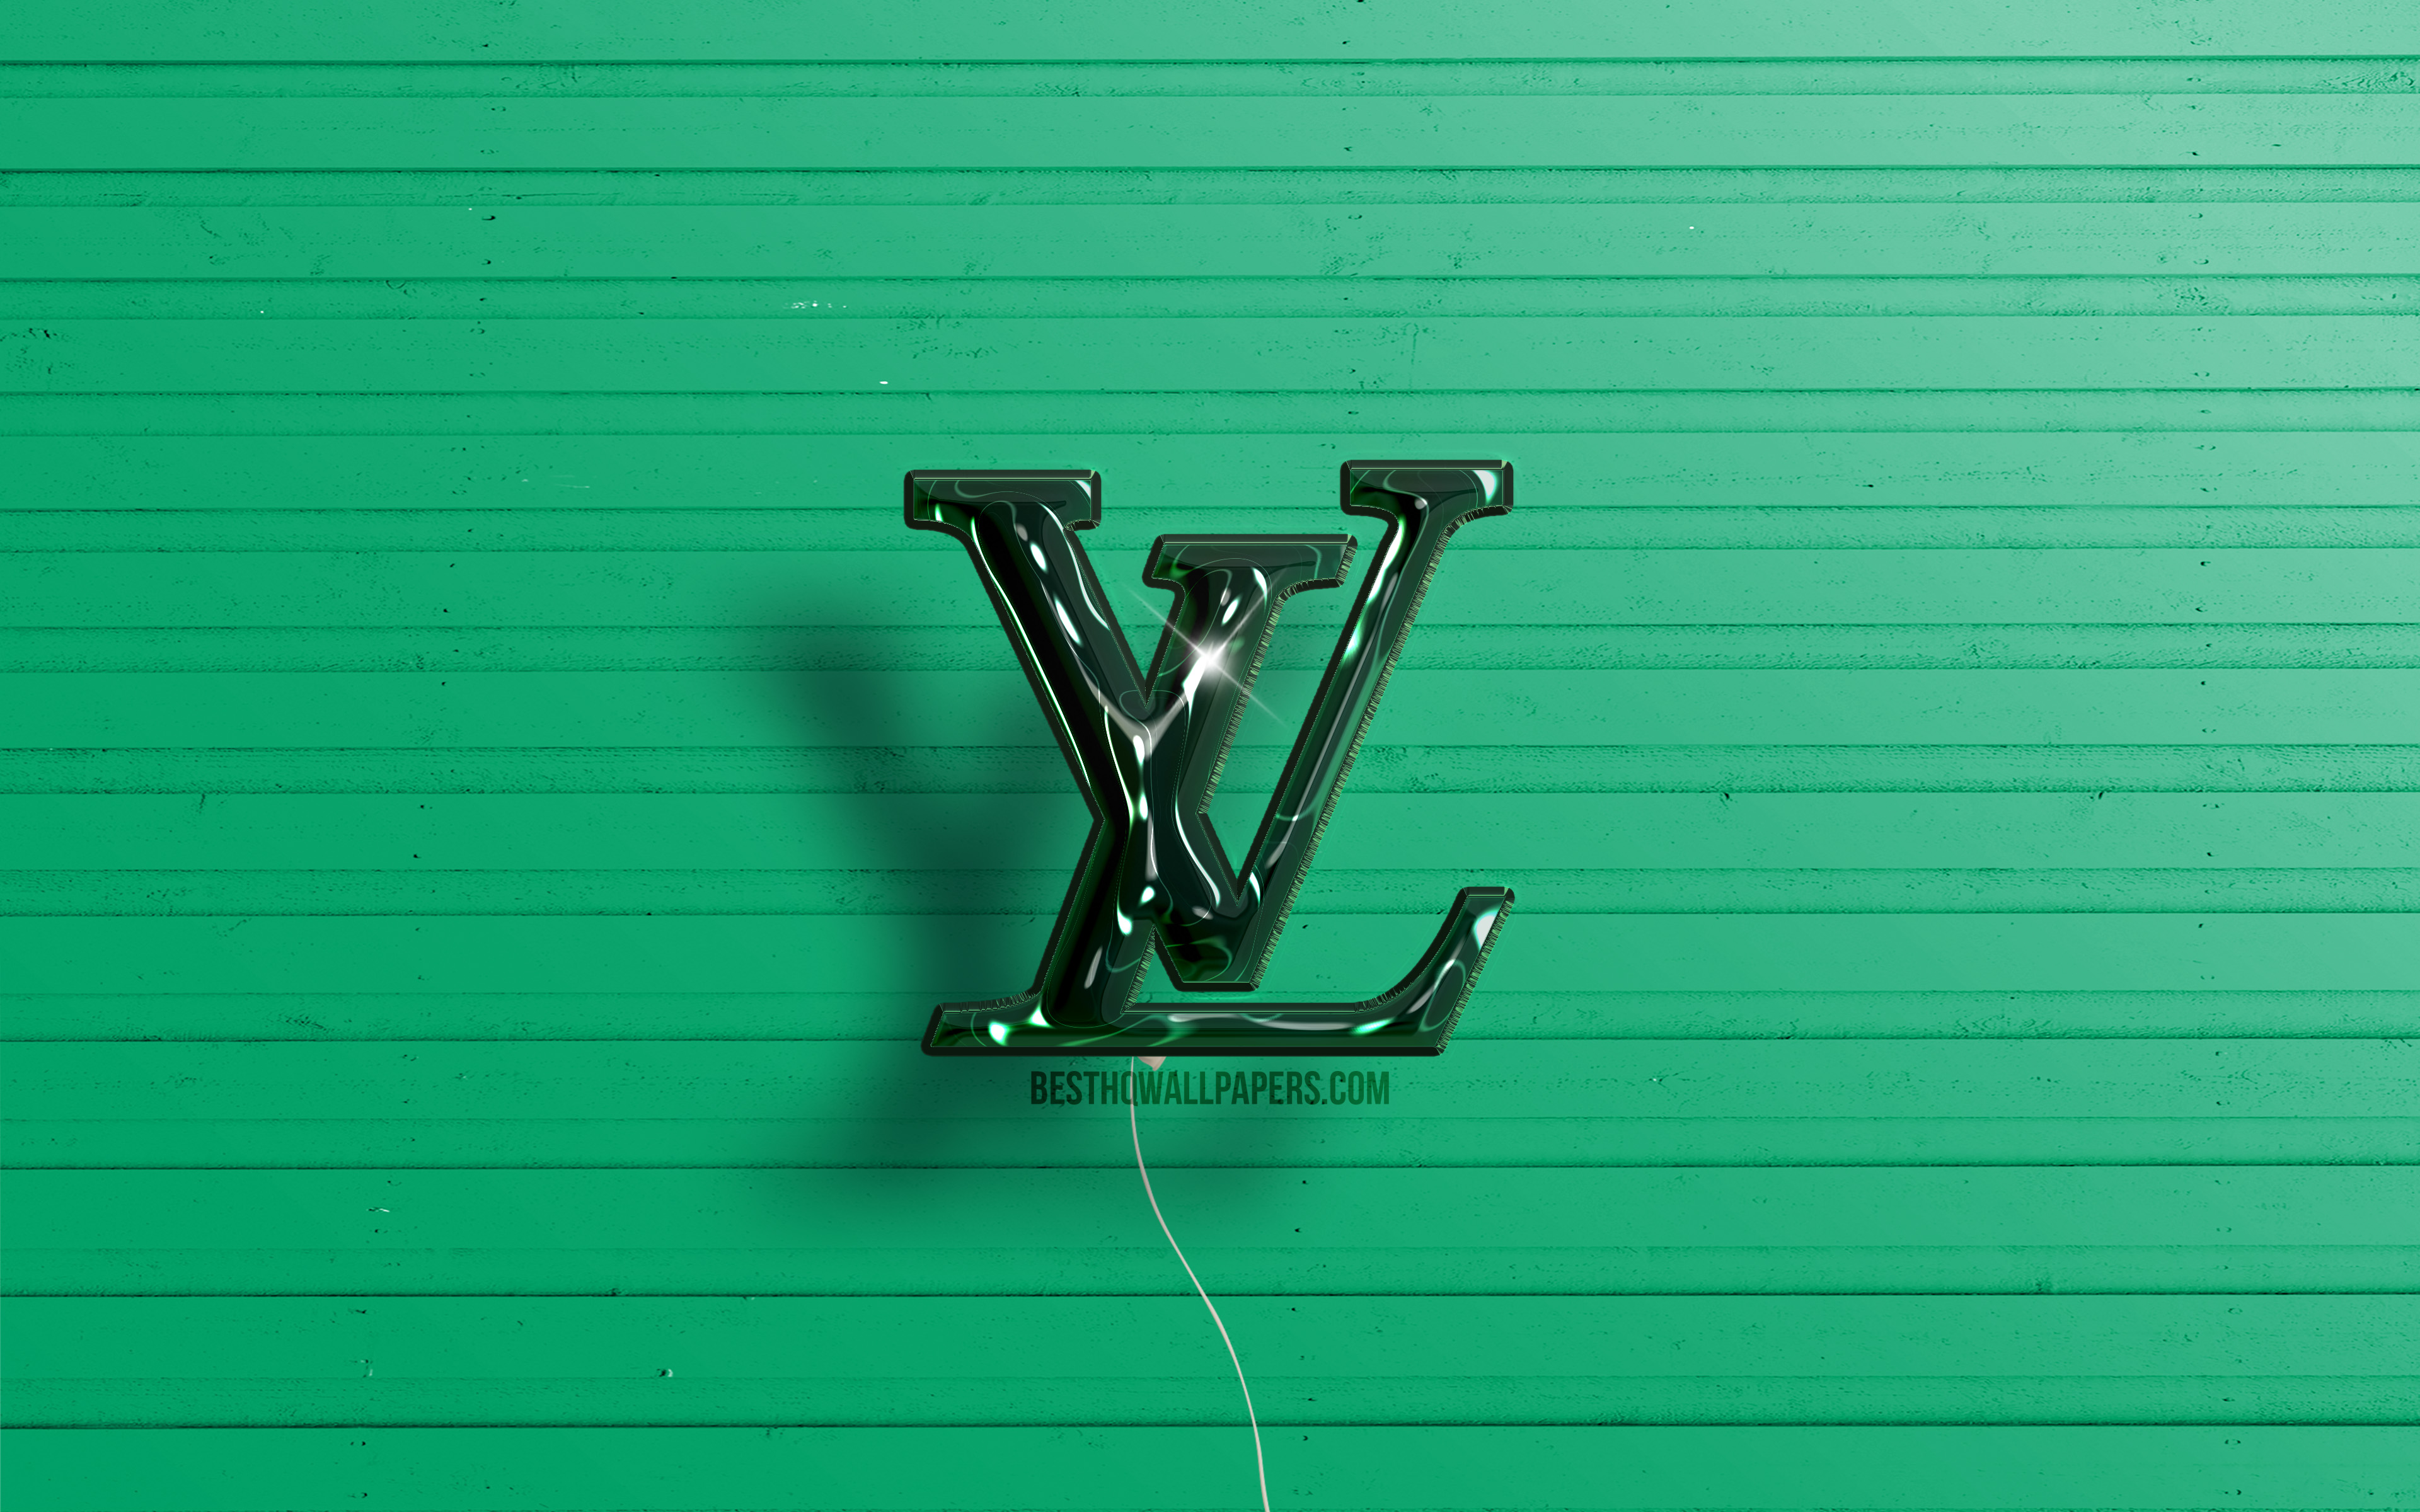 Louis Vuitton Green Wallpaper - Download to your mobile from PHONEKY